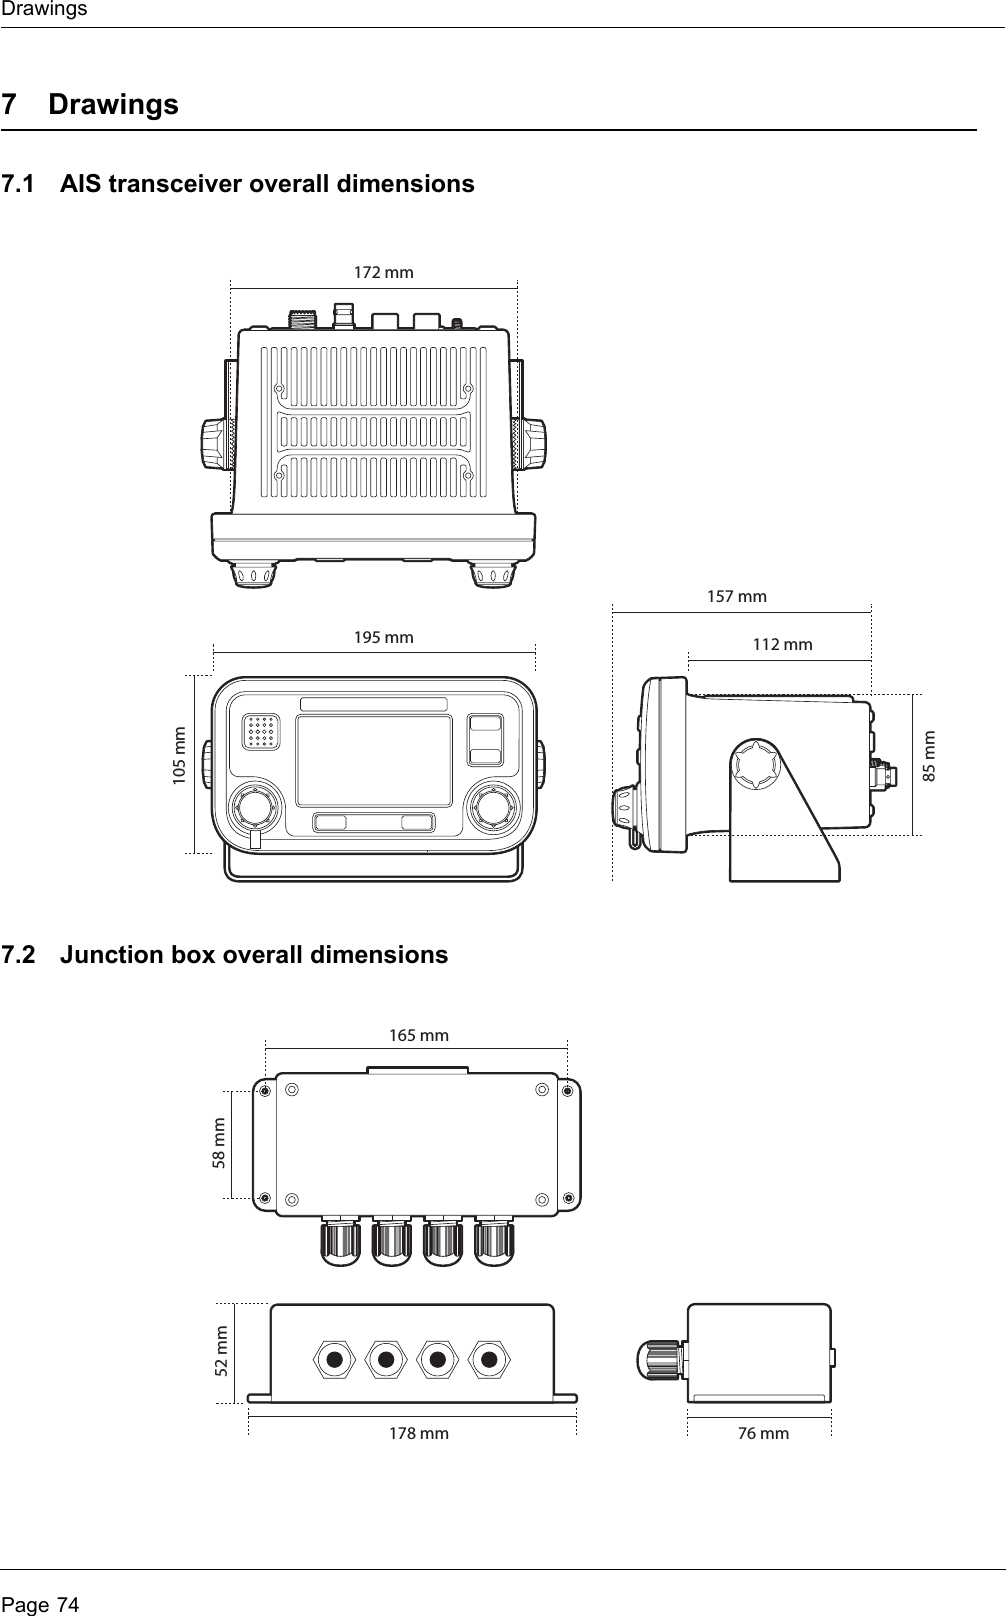 DrawingsPage 747Drawings7.1 AIS transceiver overall dimensions7.2 Junction box overall dimensions105 mm85 mm195 mm172 mm112 mm157 mm178 mm52 mm76 mm165 mm58 mm